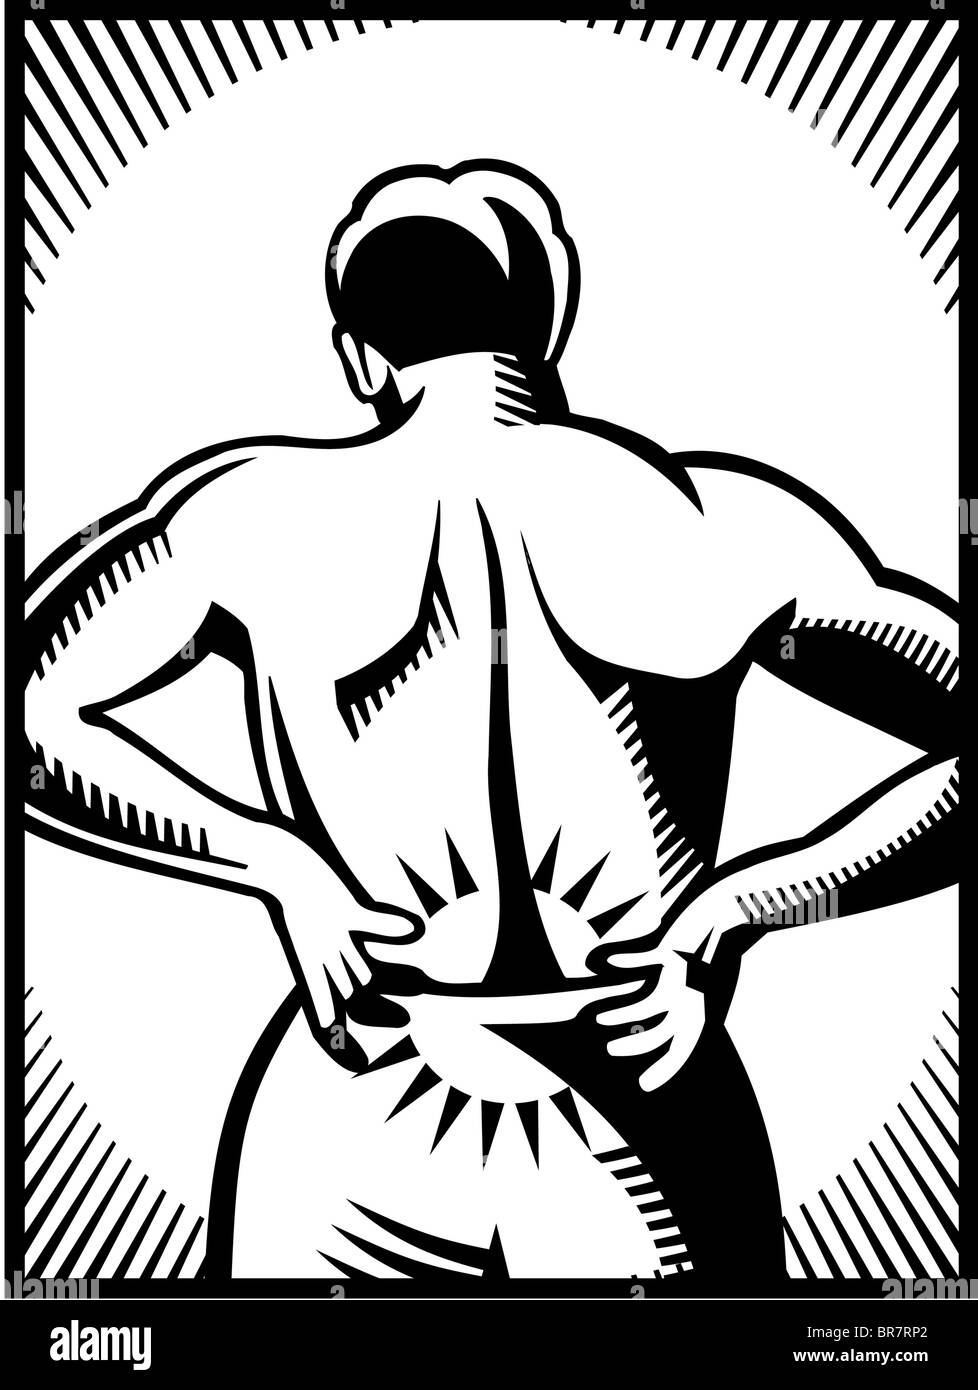 A black and white illustration of a man with lower back pain Stock Photo